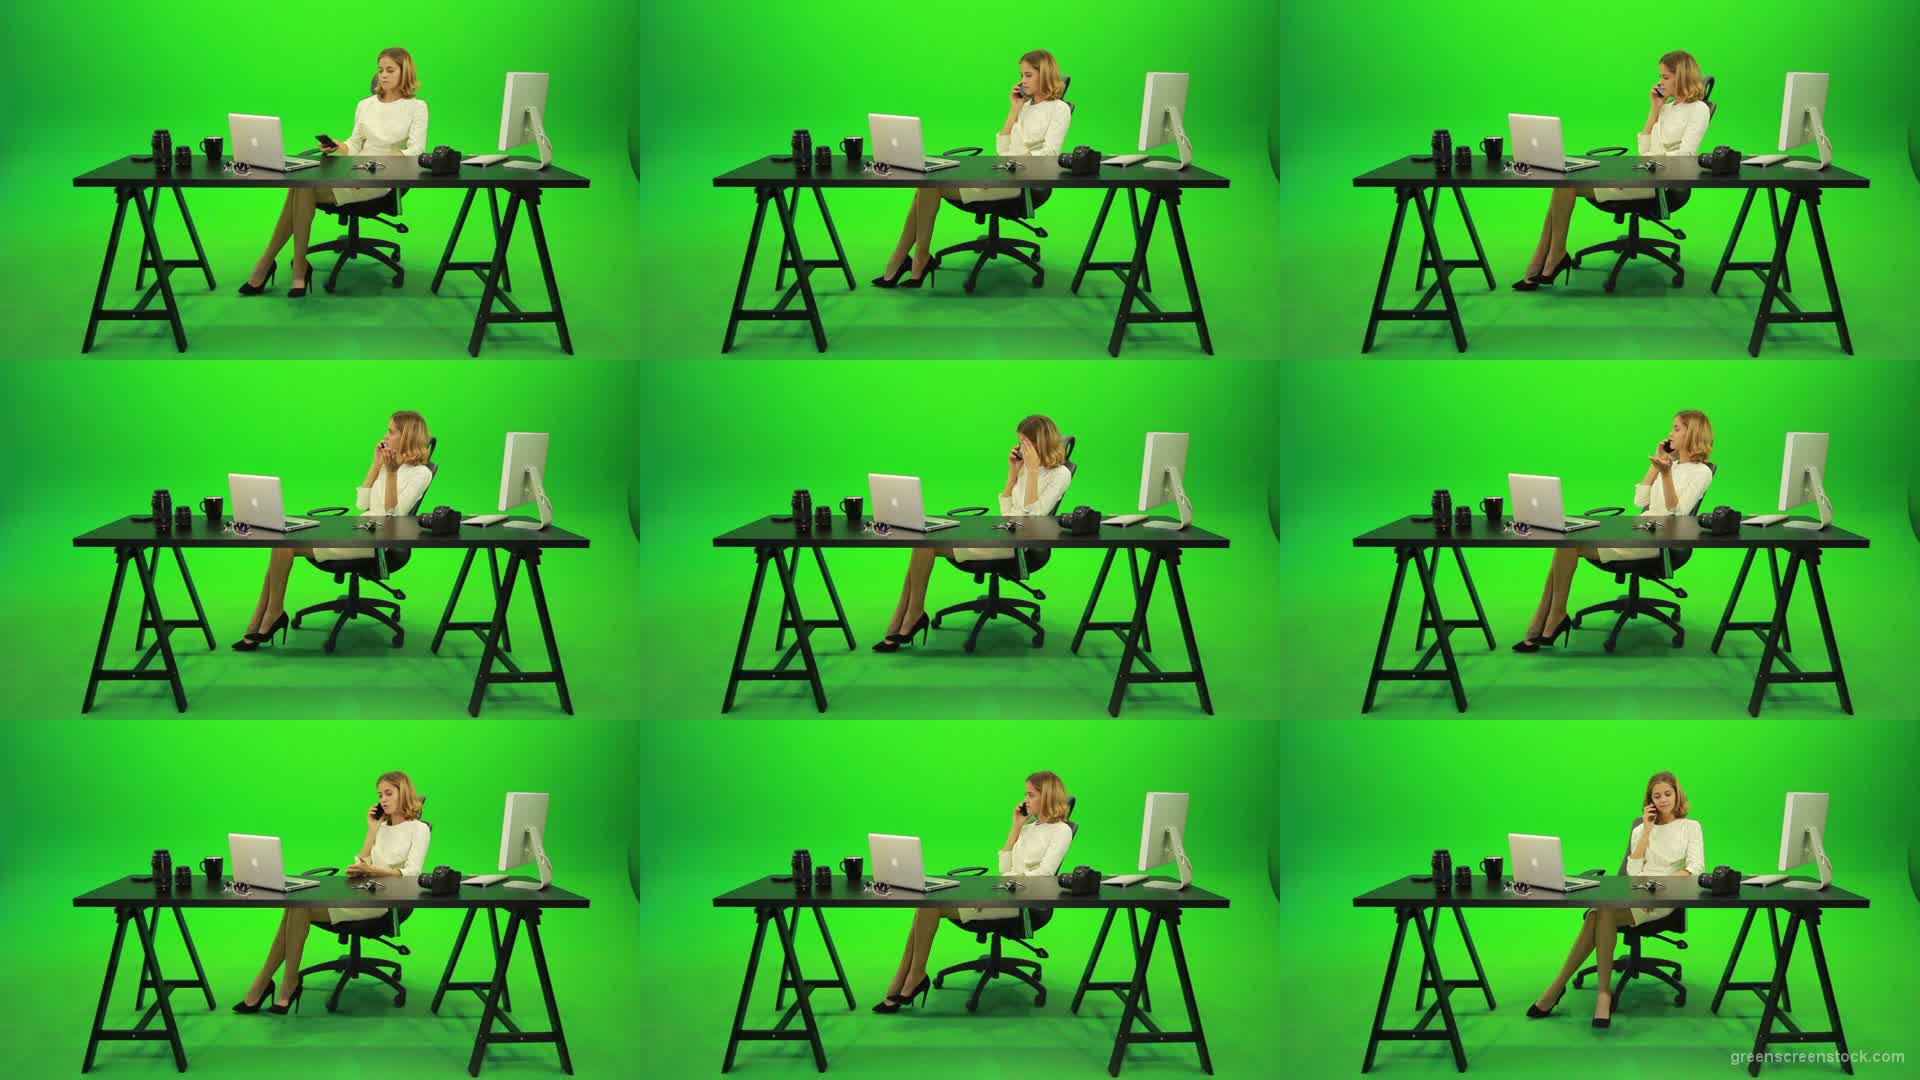 Angry-Business-Woman-Talking-on-the-Phone-Green-Screen-Footage Green Screen Stock